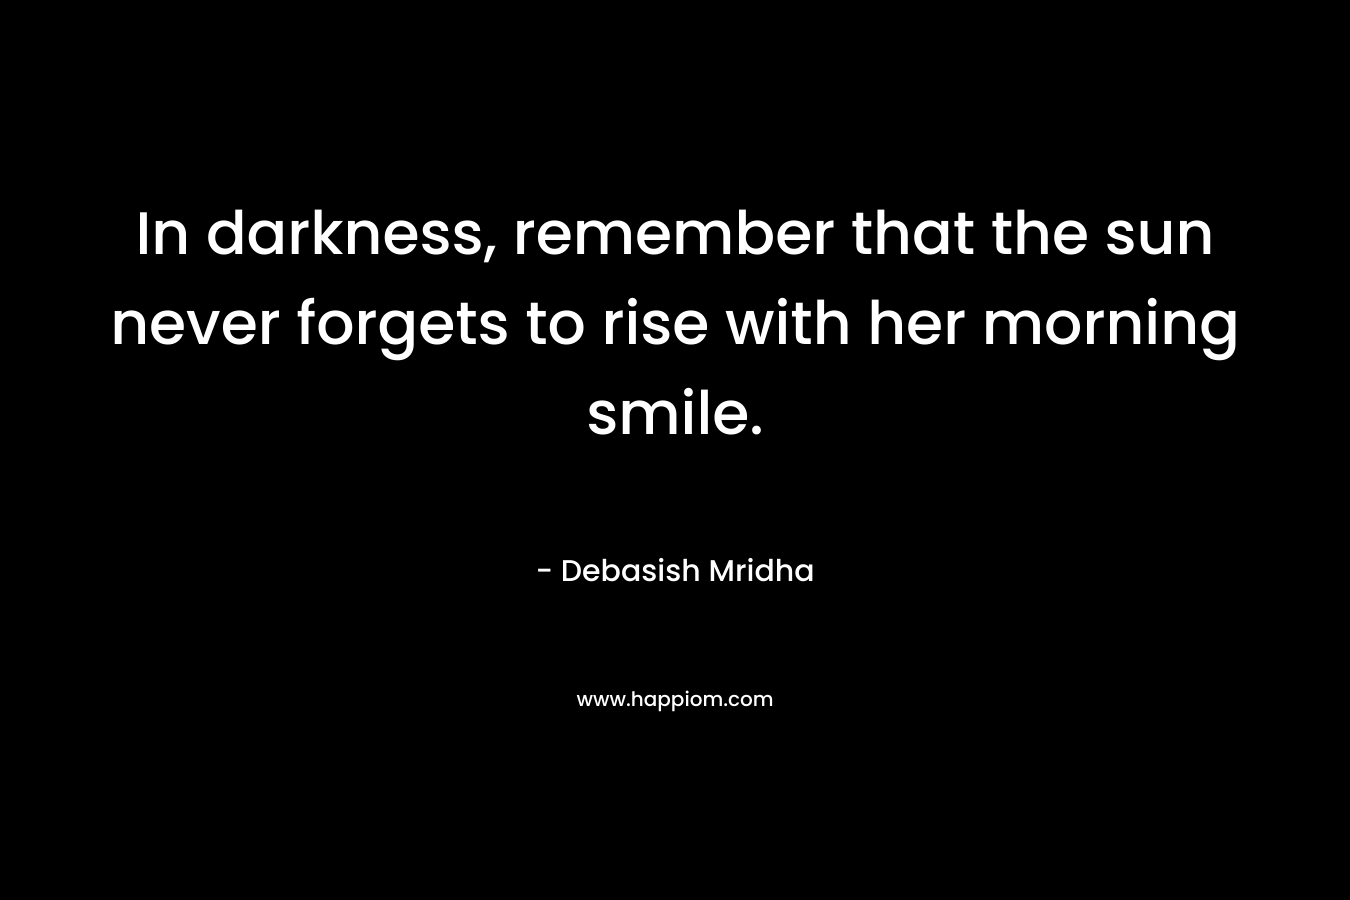 In darkness, remember that the sun never forgets to rise with her morning smile.